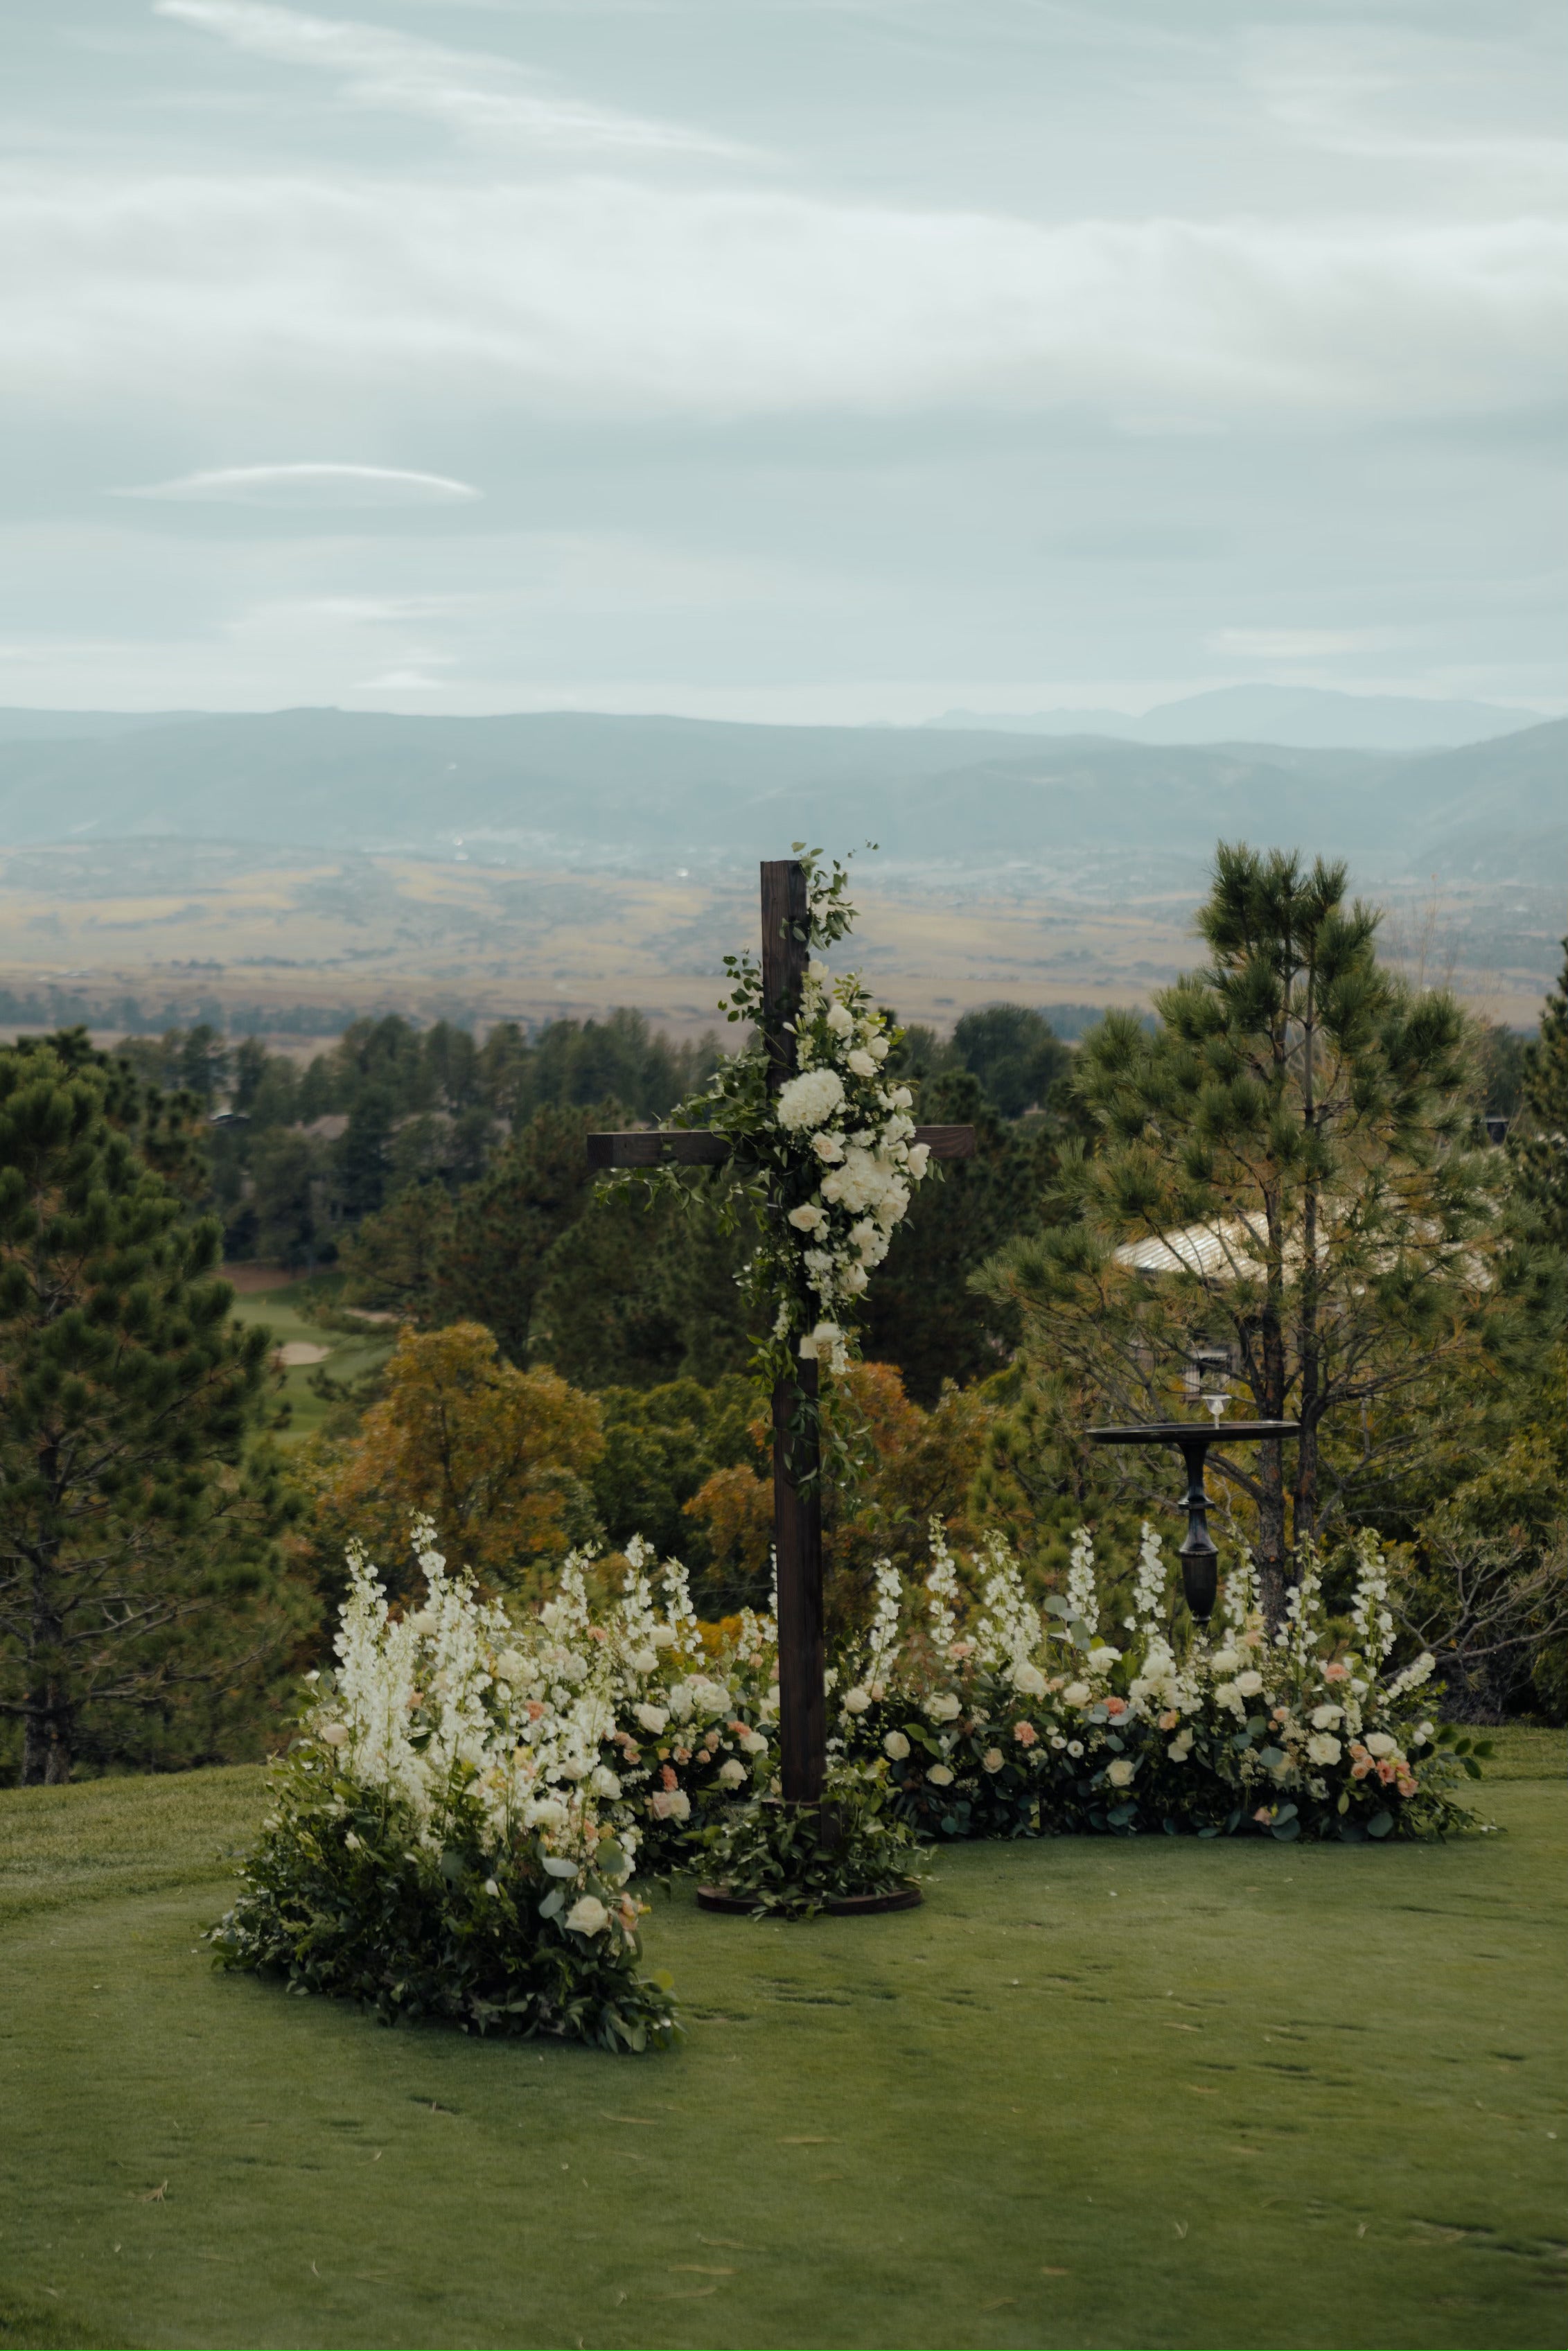 A wedding ceremony on a golf course adorned with beautiful wedding flowers and a cross placed in the middle.